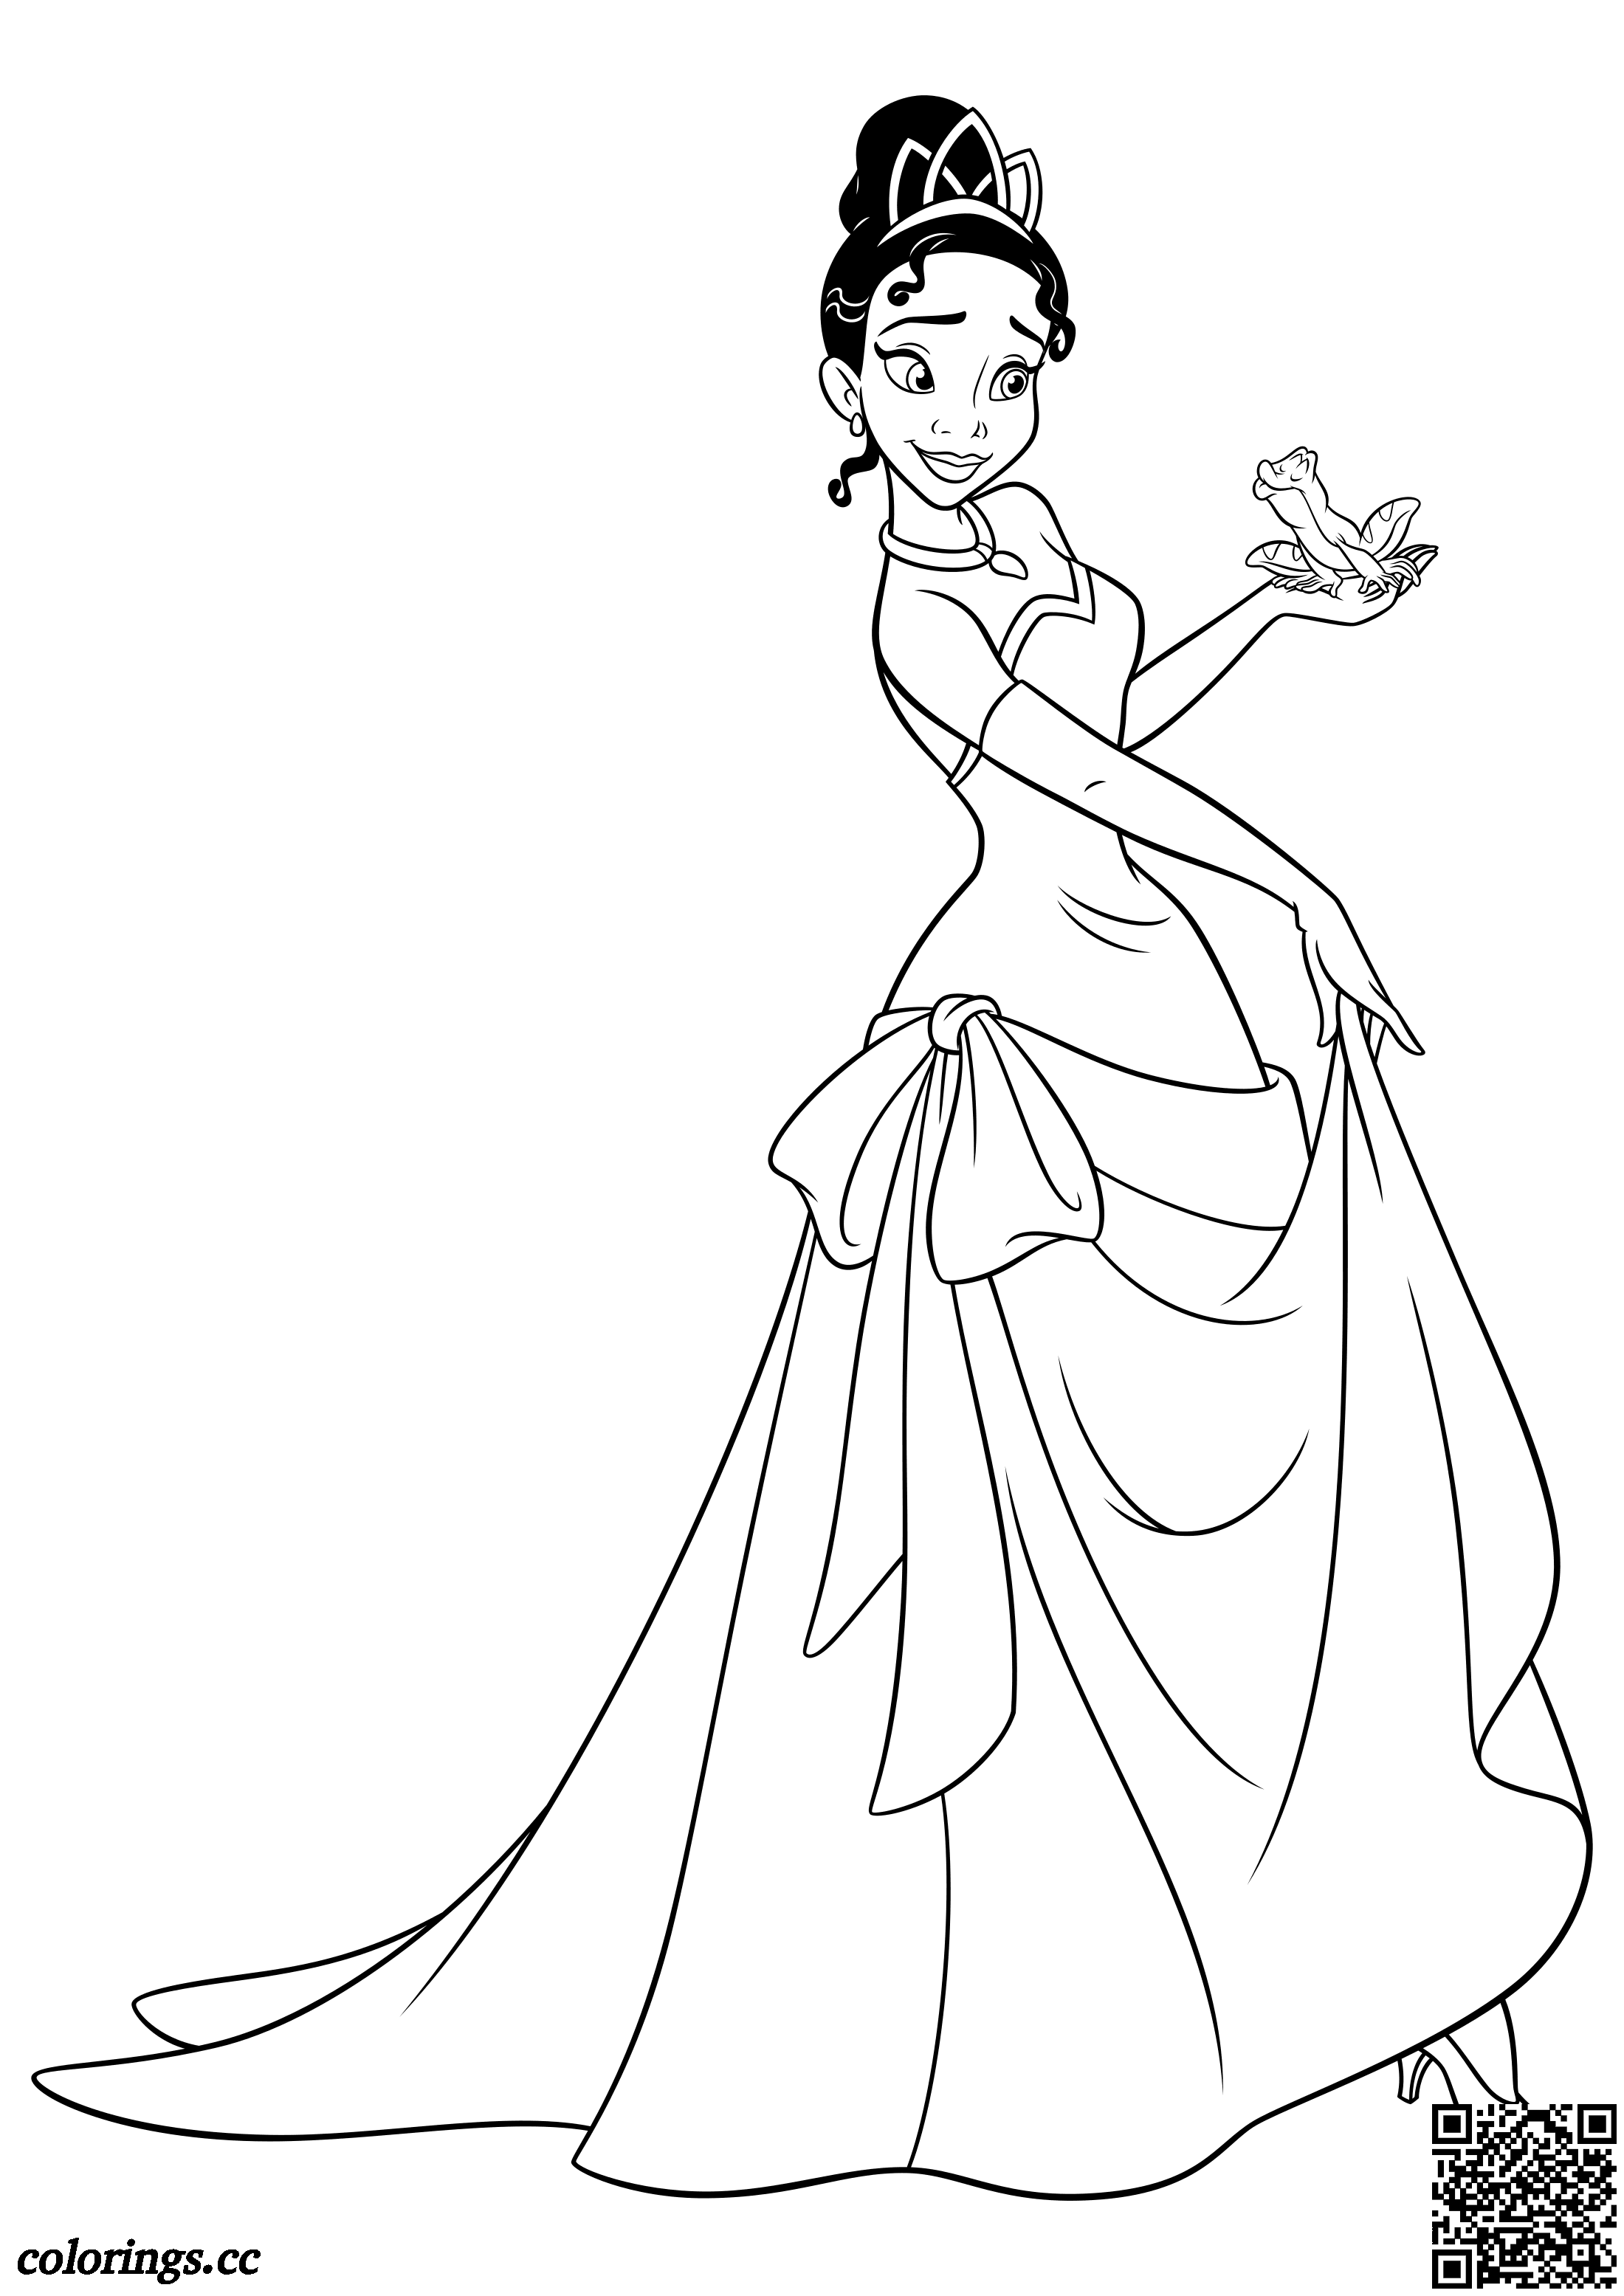 Tiana and Navin coloring pages, Disney princesses coloring pages ...